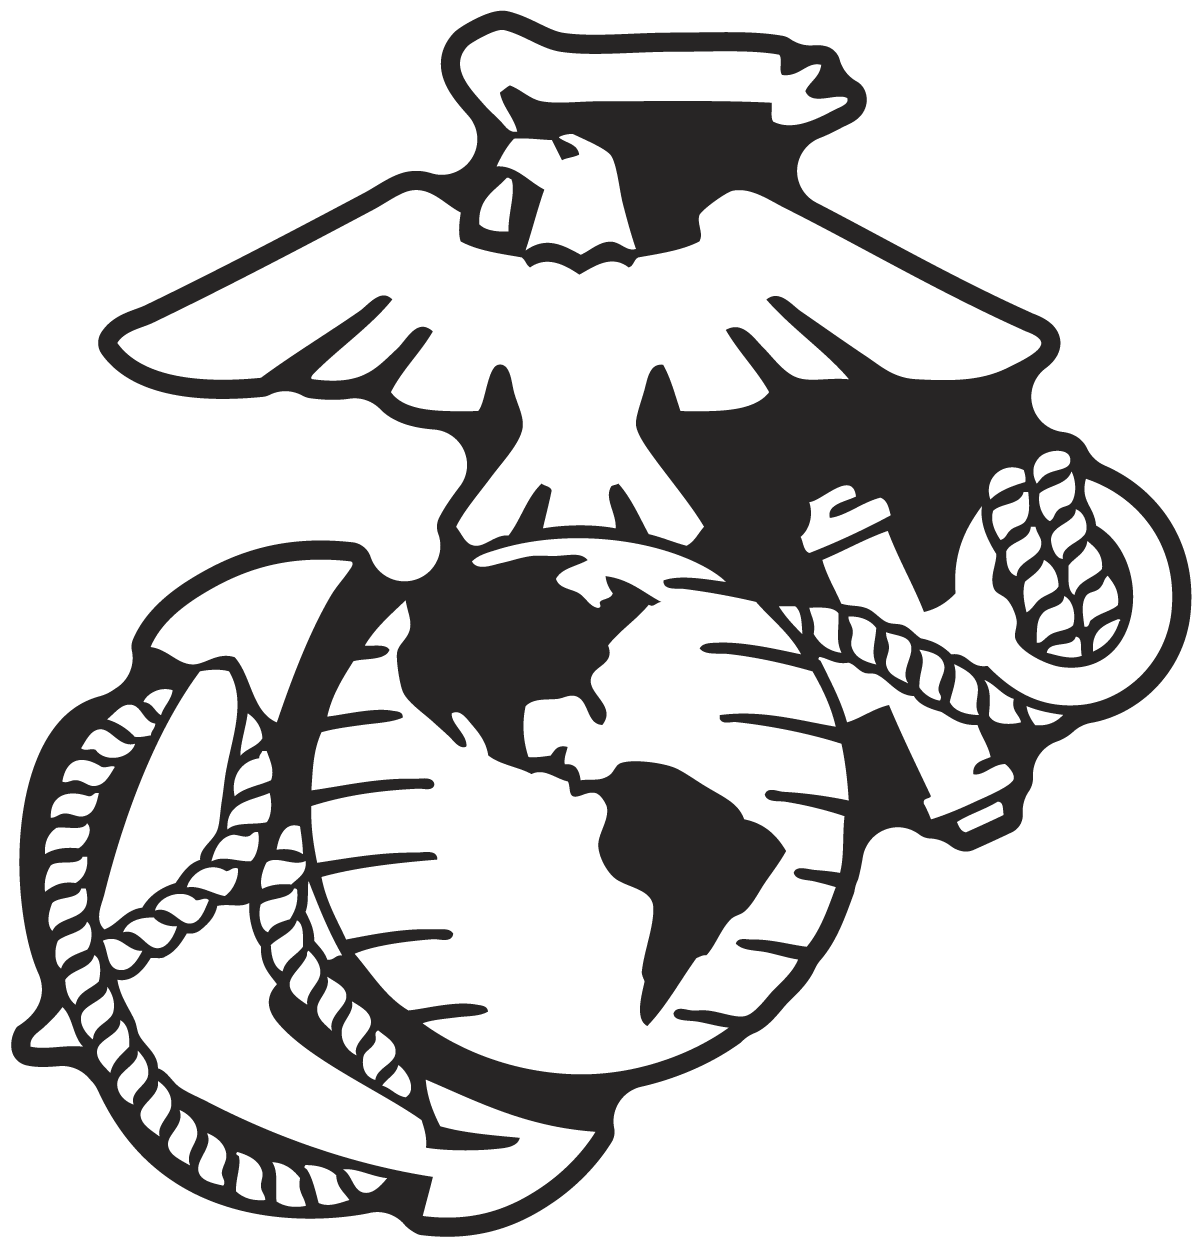 USMC Eagle Globe Anchor Reflective Decals – Fire Safety Decals